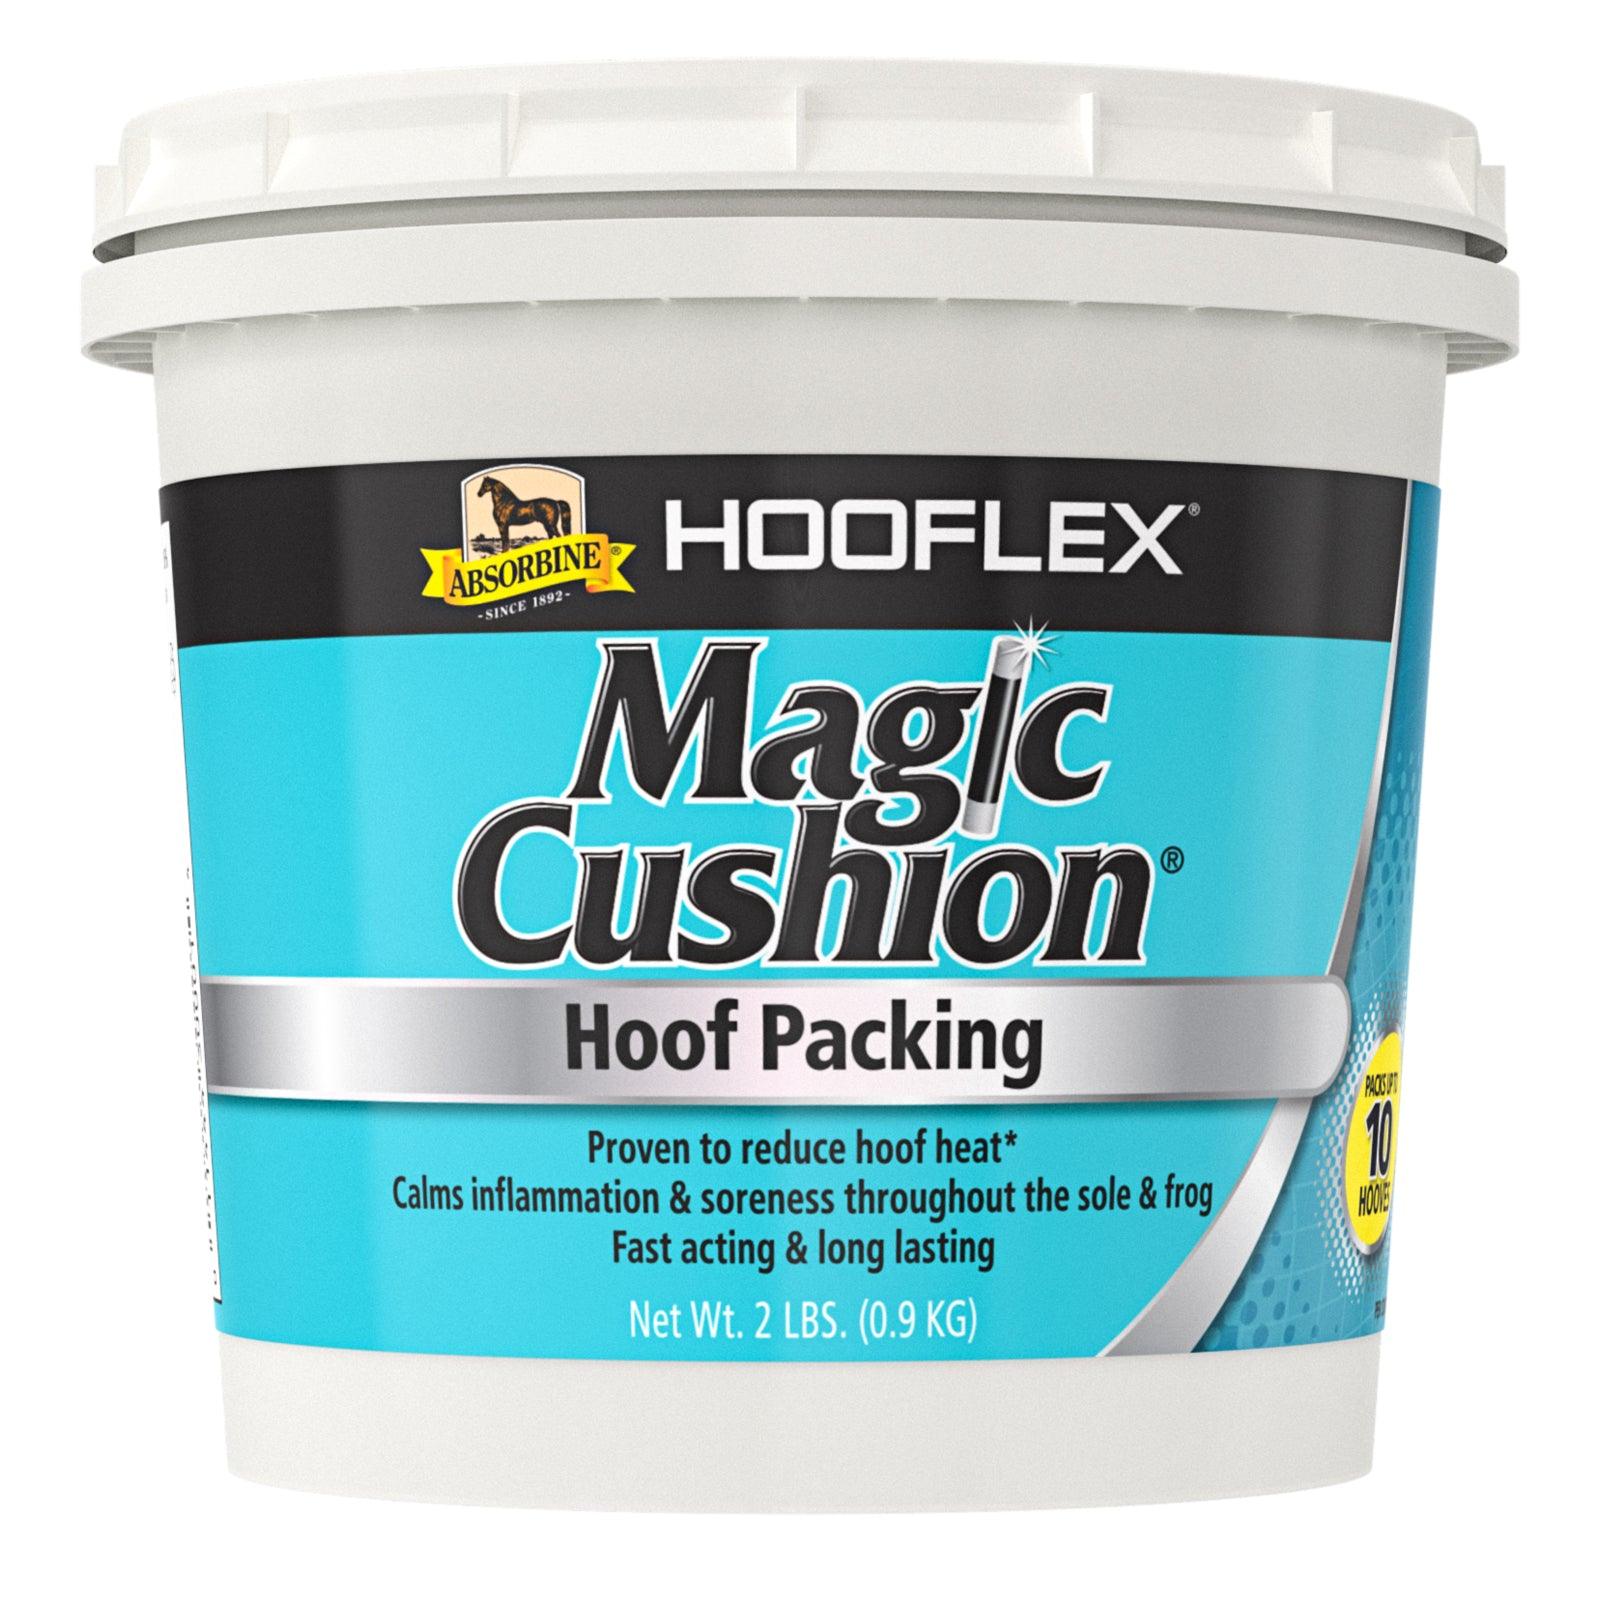 Magic Cushion Hoof Packing.  Proven to reduce hoof heat.  Calms inflammation & soreness throughout the sole & frog.  Fast acting, long lasting.  Net weight 2 pound bucket.